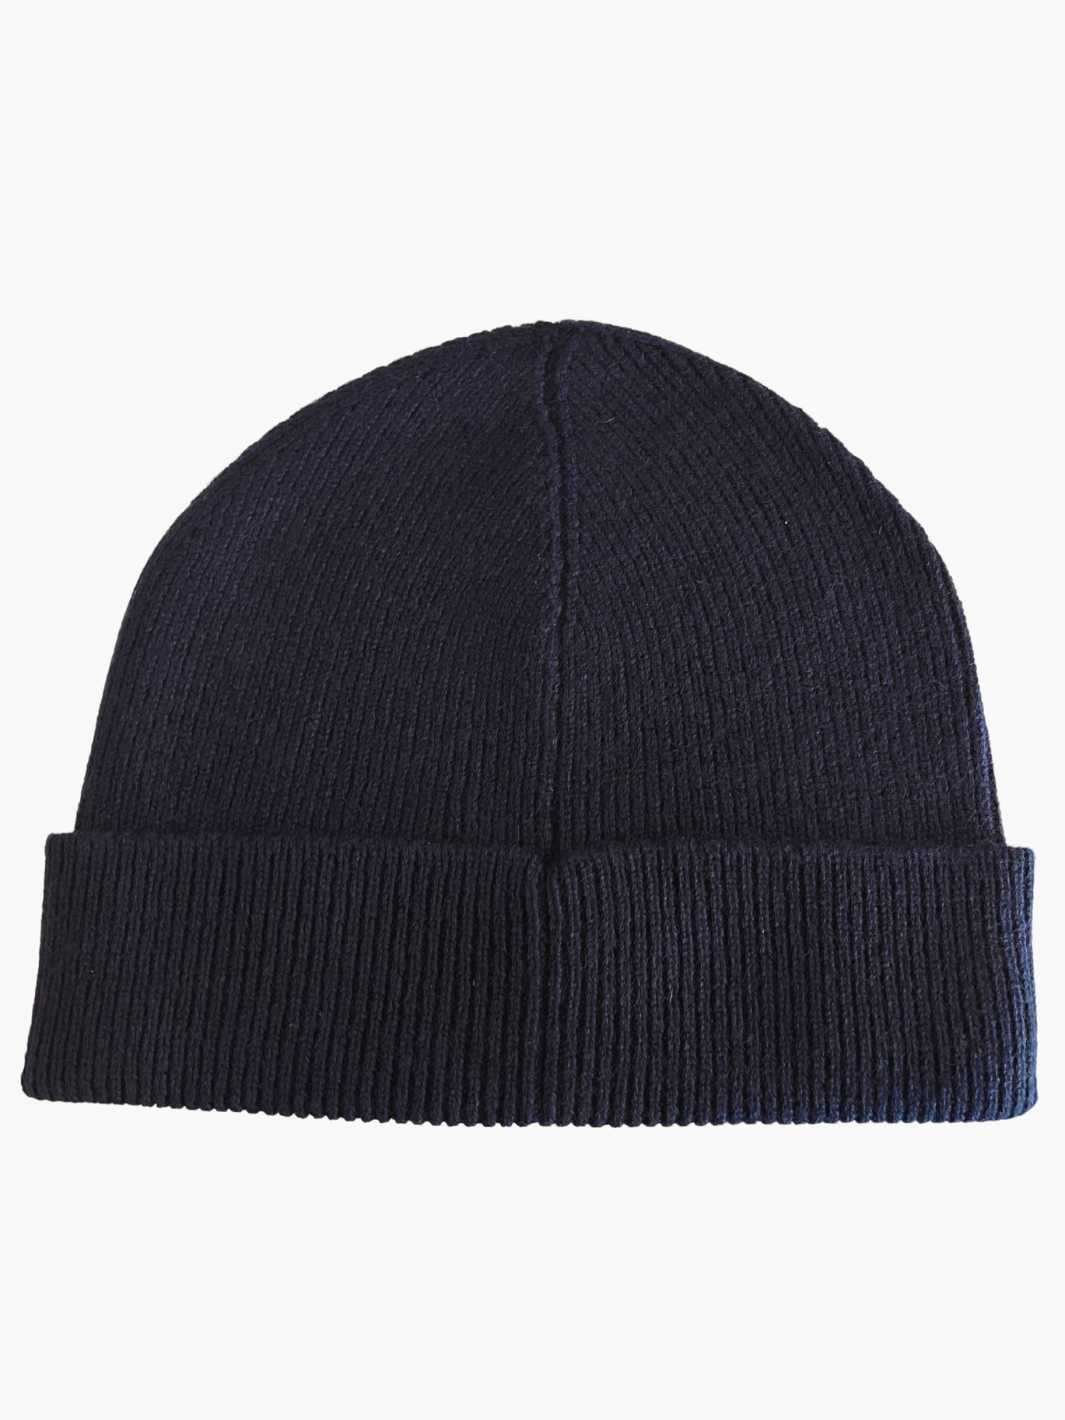 RIBBED TURNBACK HAT IN NAVY - Romi Boutique